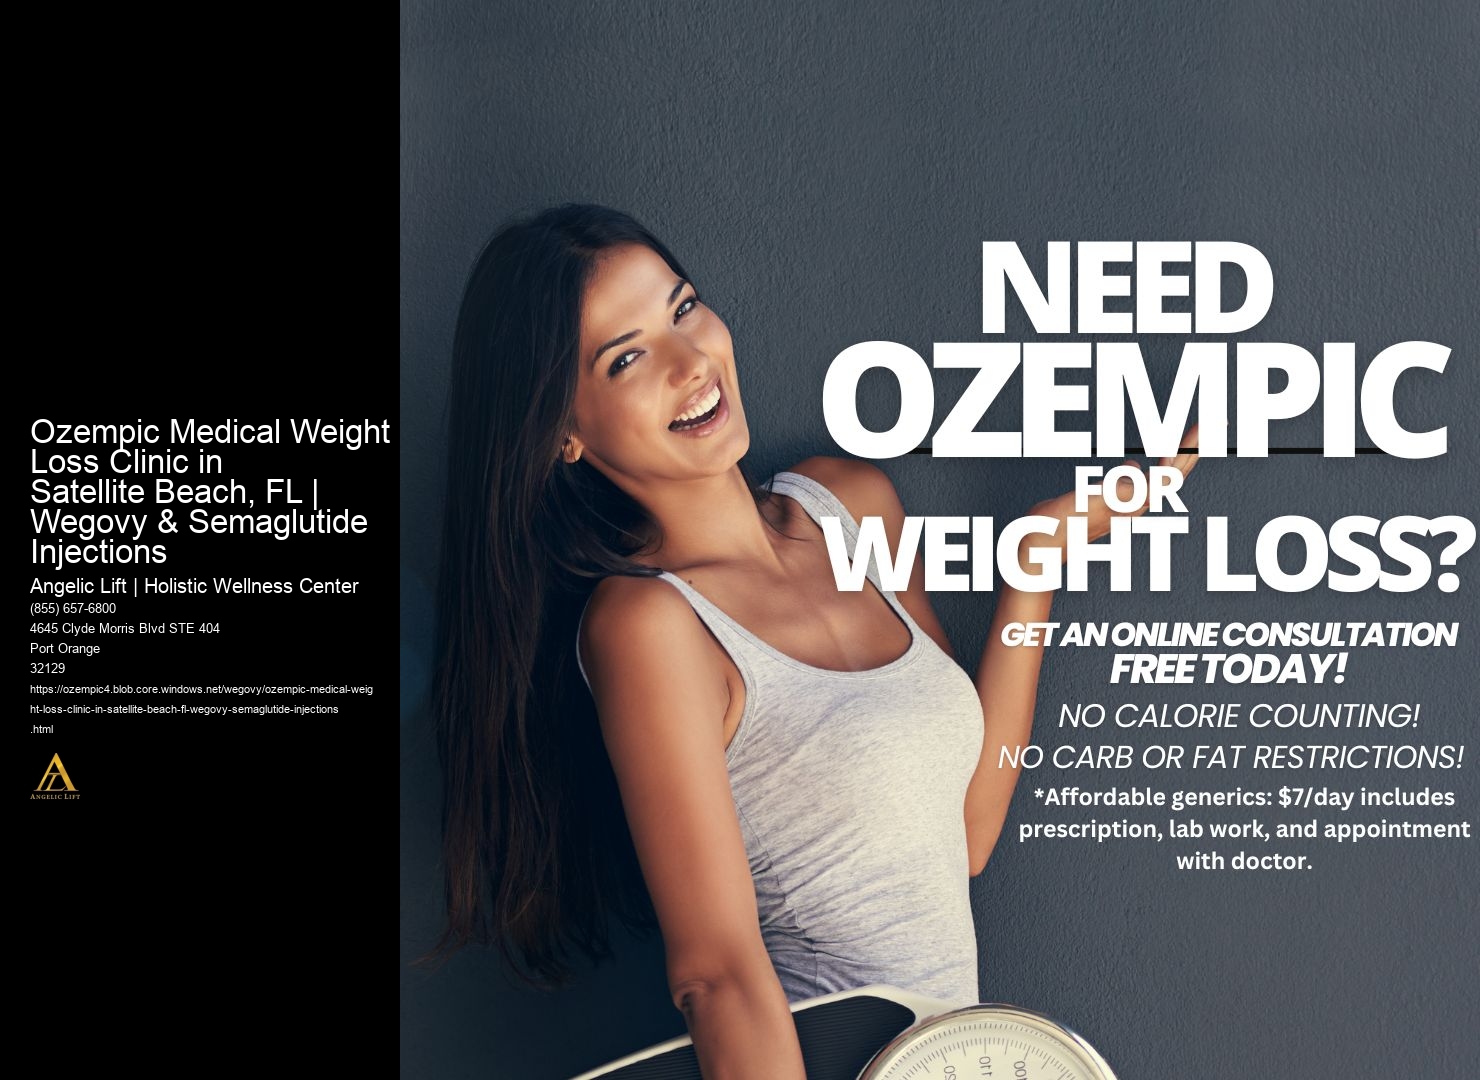 Ozempic Medical Weight Loss Clinic in Satellite Beach, FL | Wegovy & Semaglutide Injections